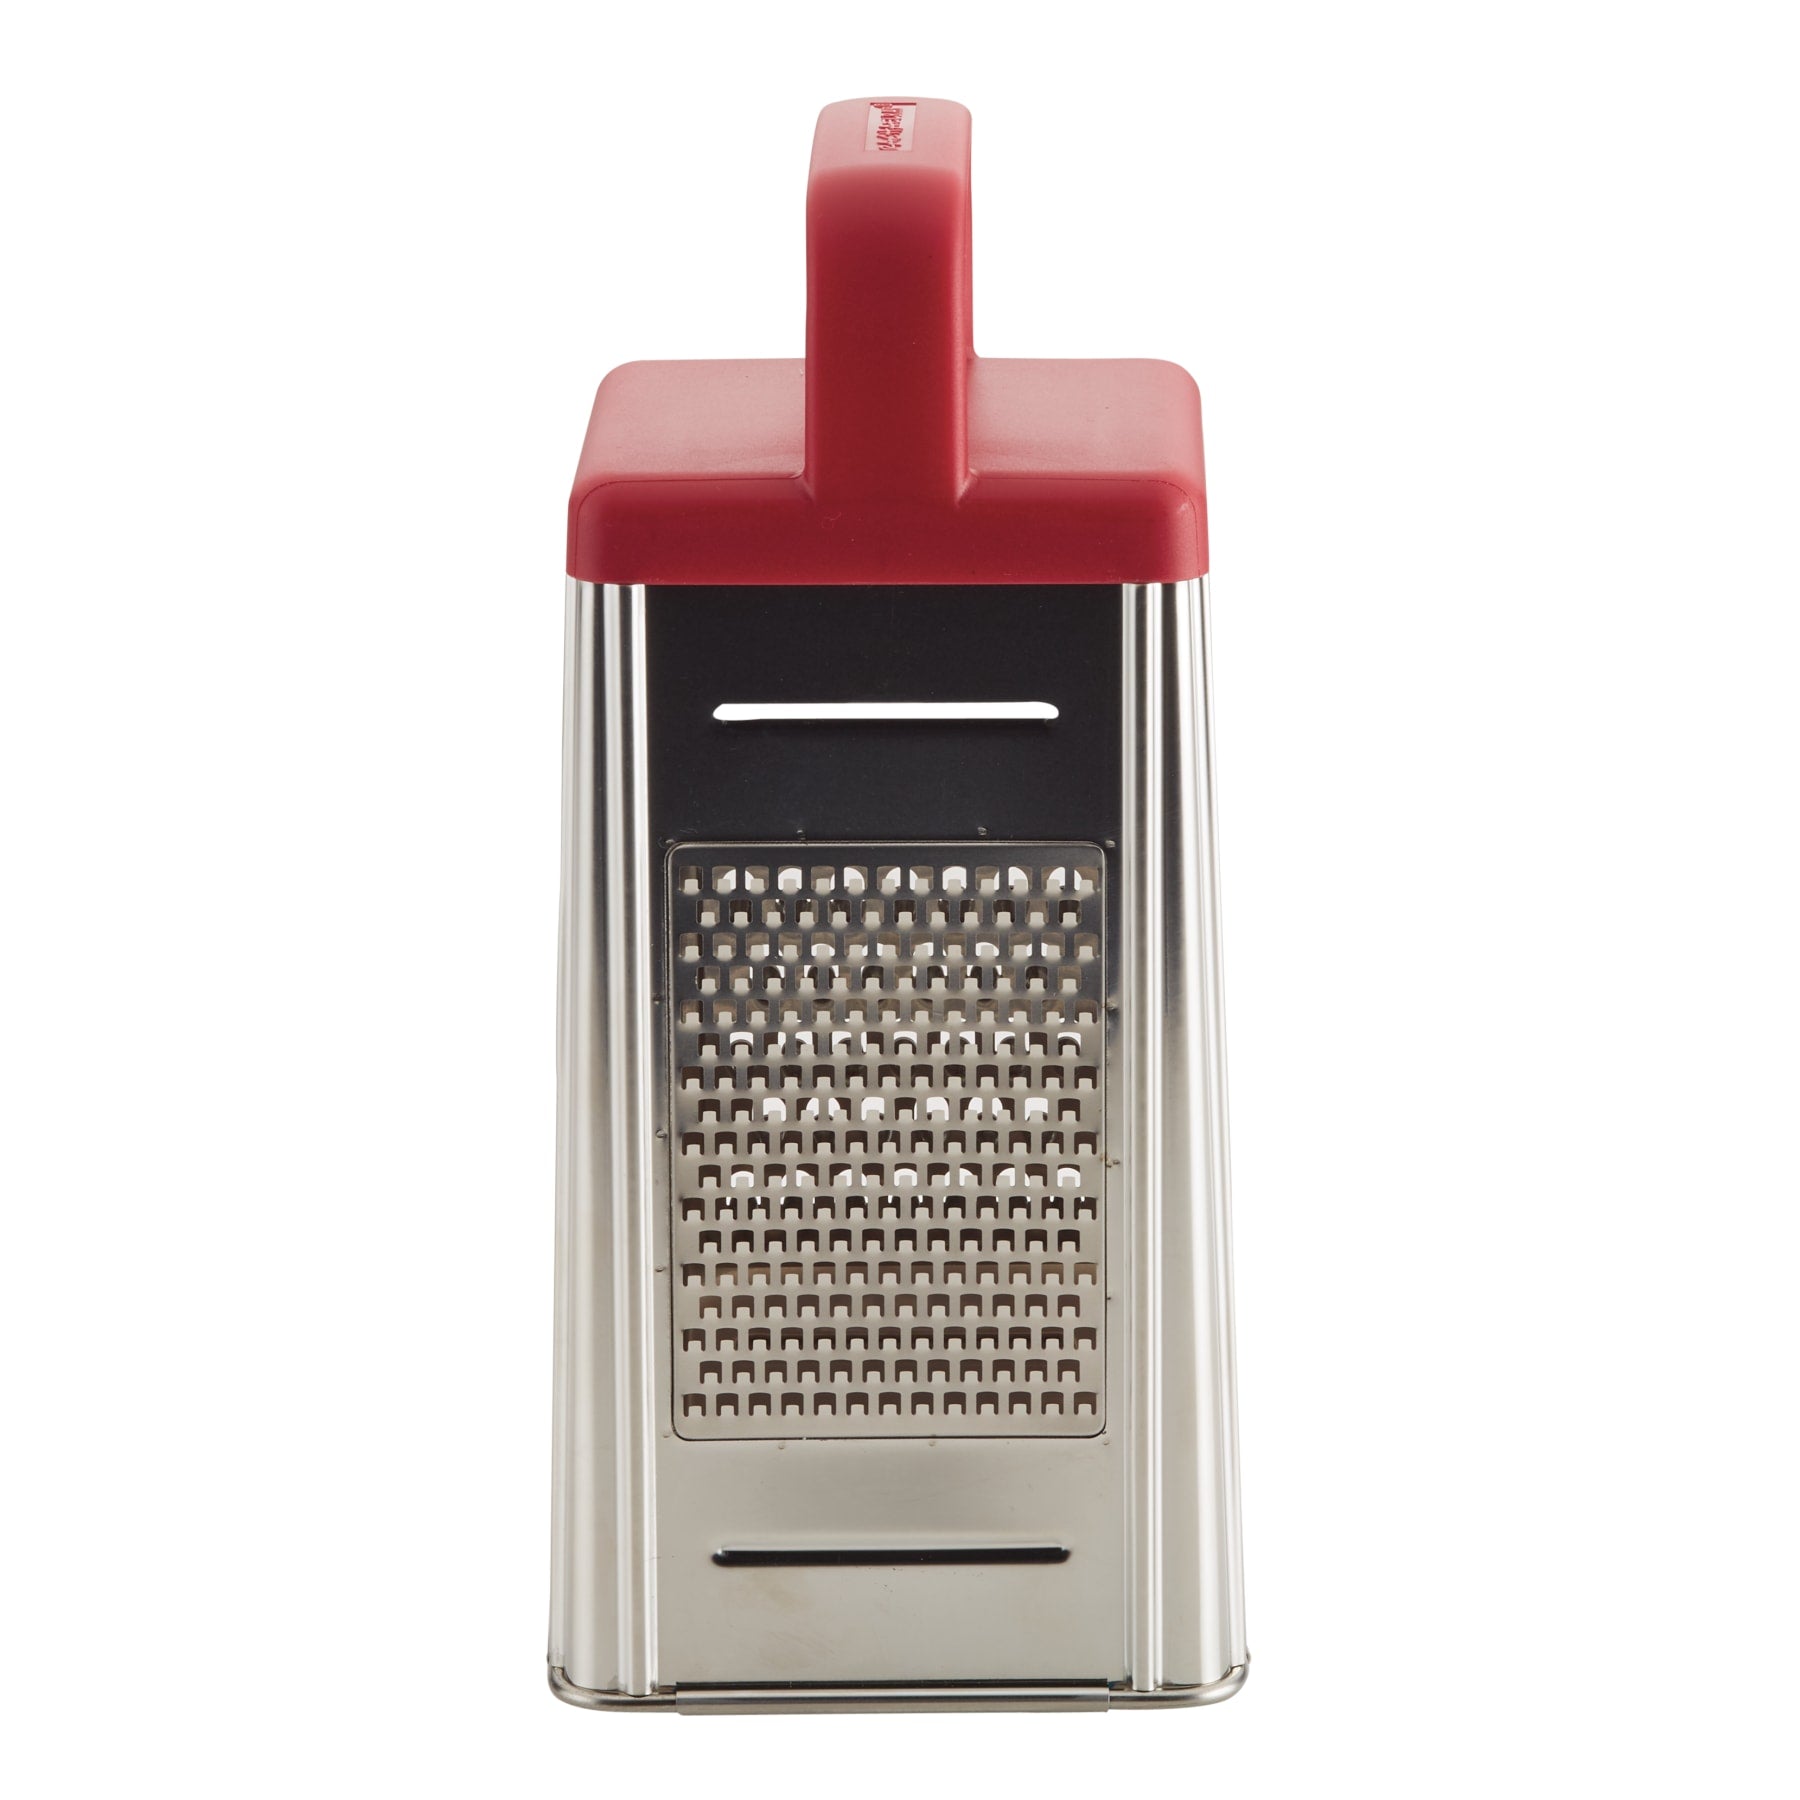 Gorilla Grip  10 4-Sided Stainless Steel Box Grater